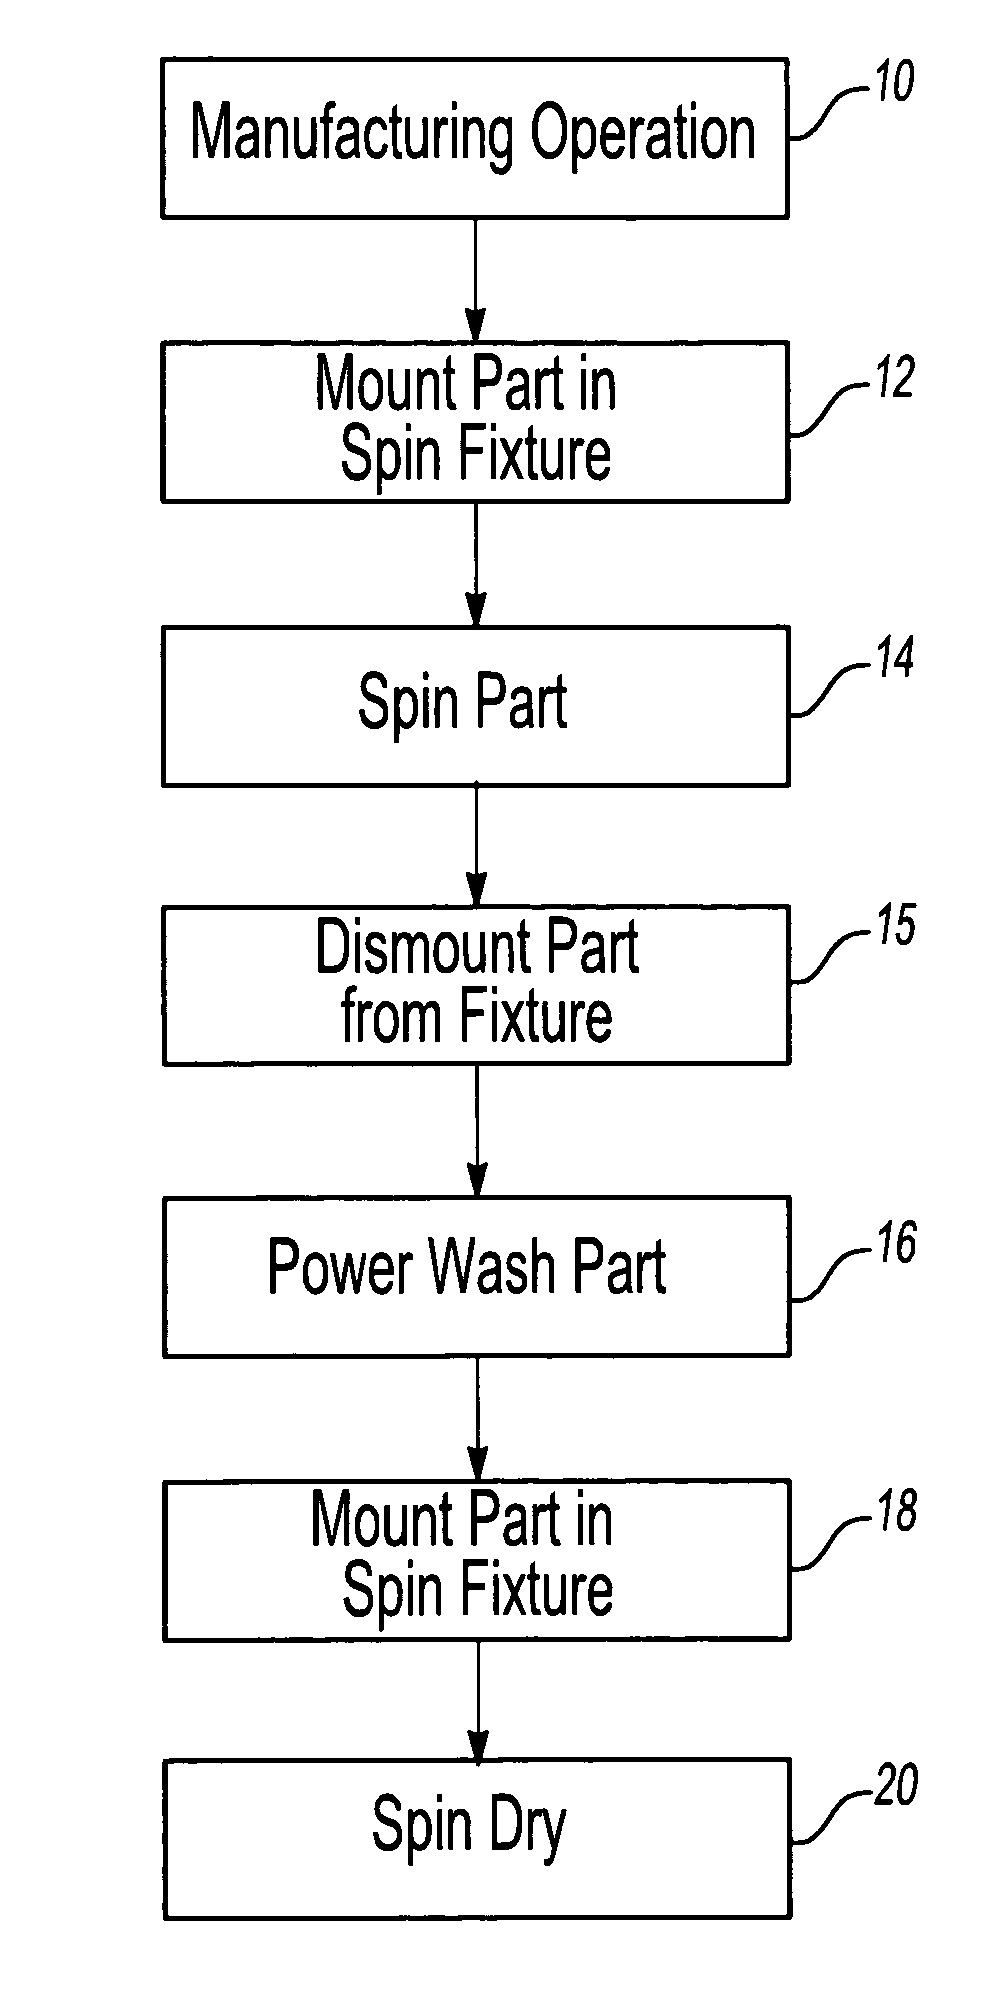 Method for cleaning an industrial part